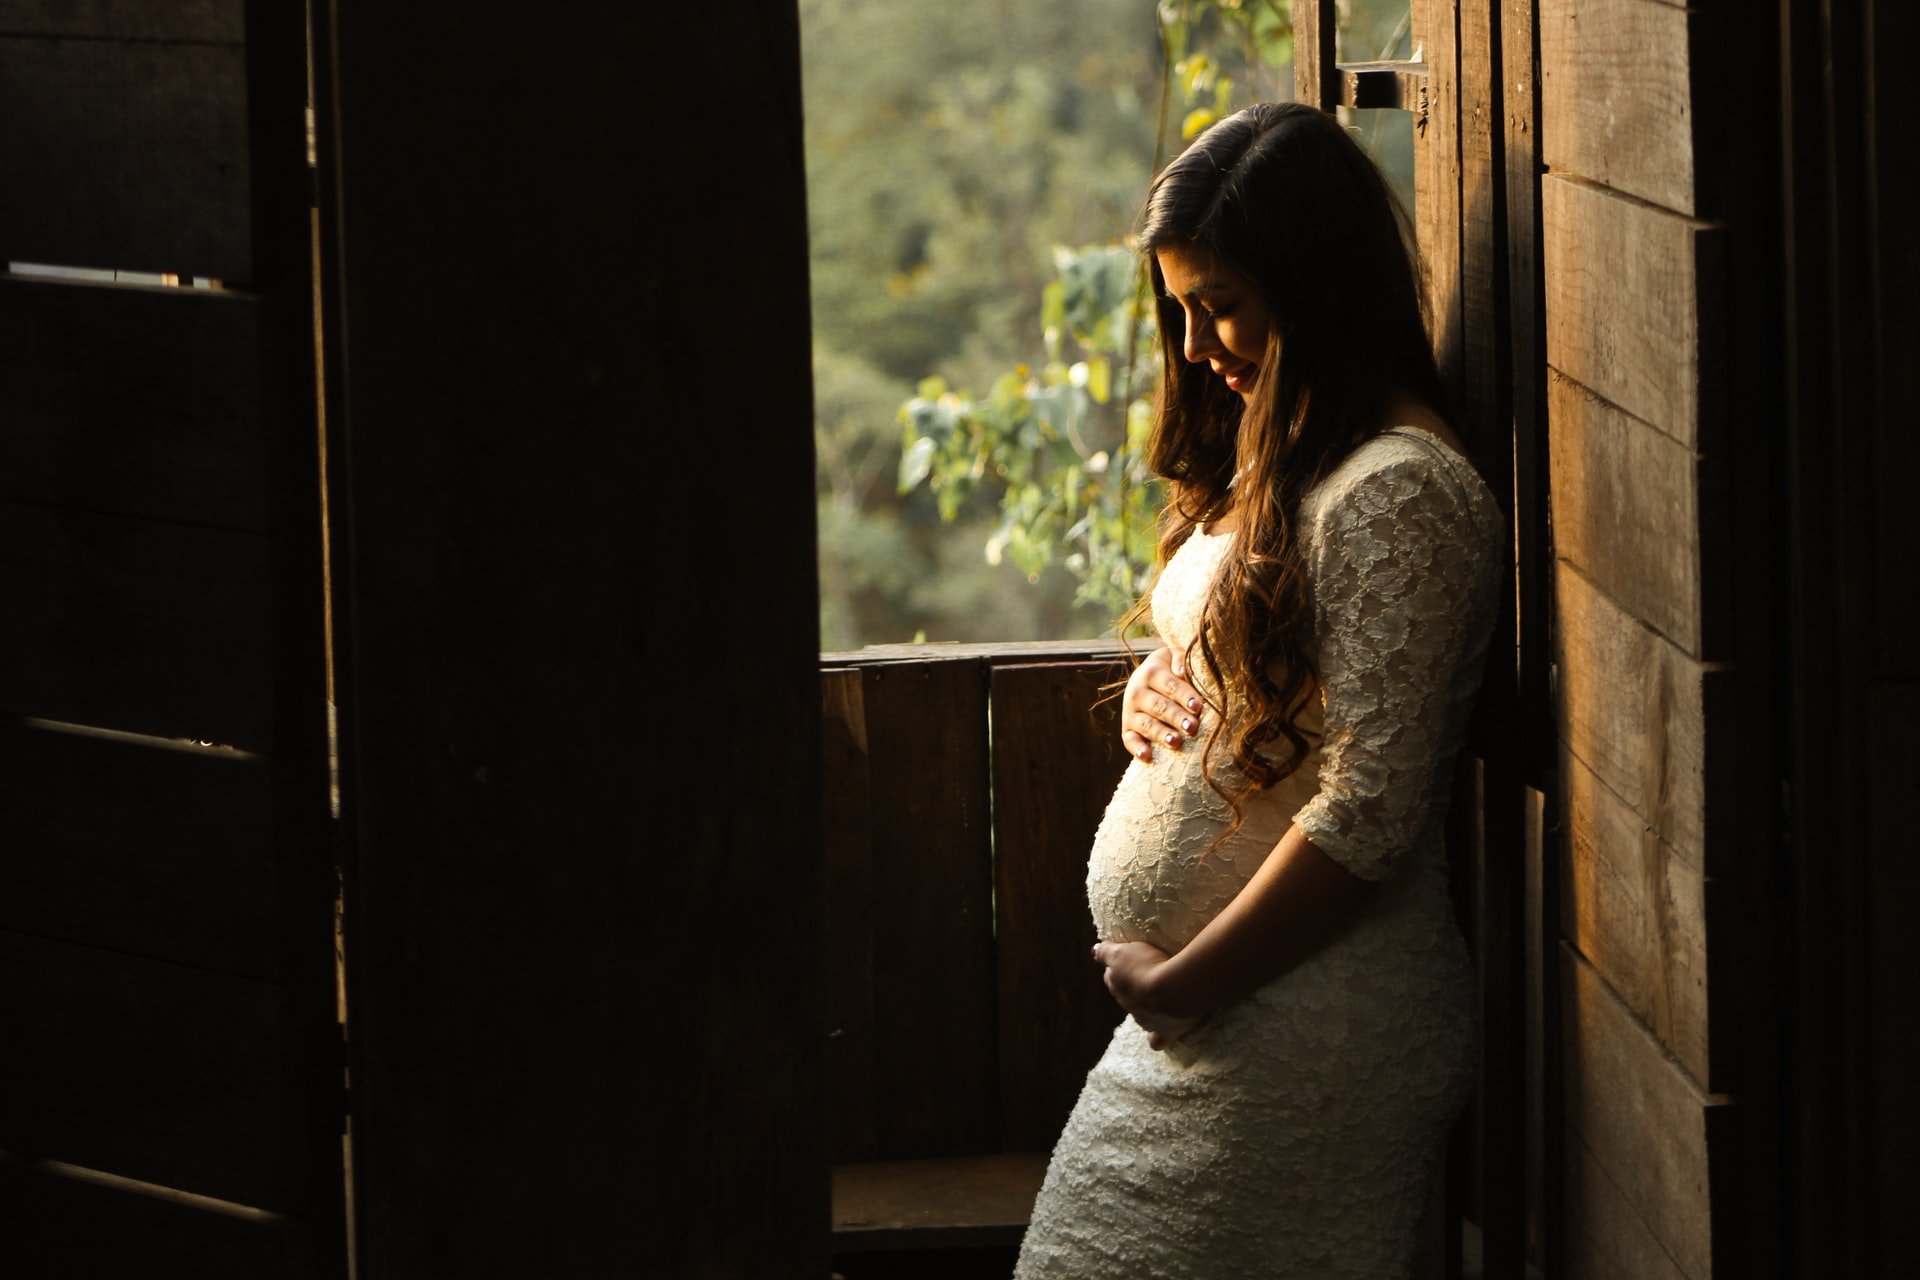 A pregnant woman holding her belly while leaning on a wall | Source: Unsplash